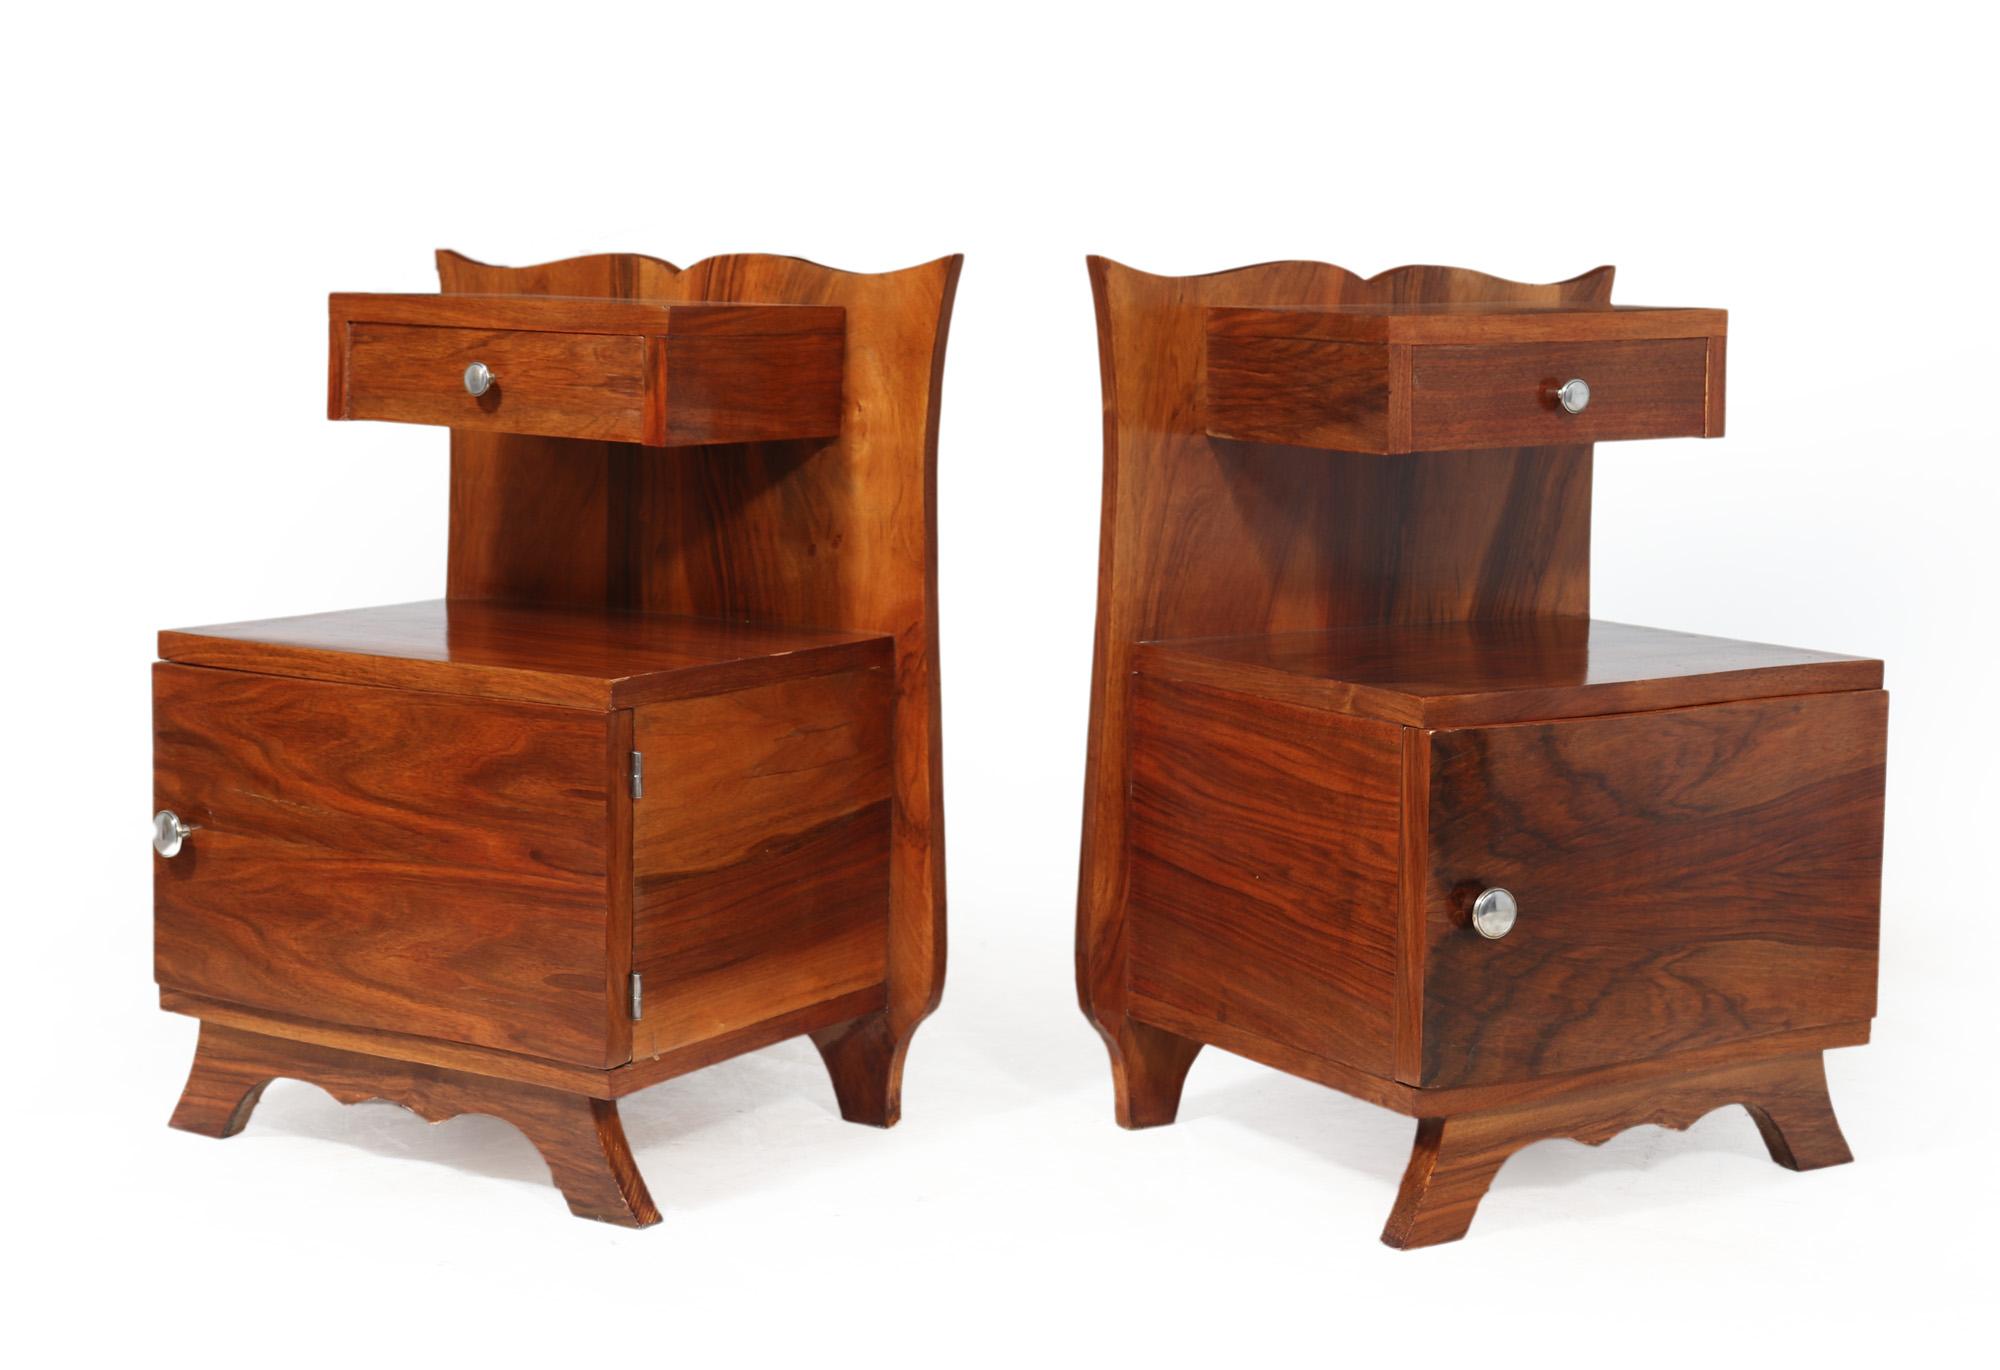 FRENCH ART DECO BEDSIDE CABINETS
A pair of French walnut Art Deco Bedside Cabinets with single door and floating top drawer, produced in the 1930’s these cabinets have been restored and fully polished by hand and are in excellent condition